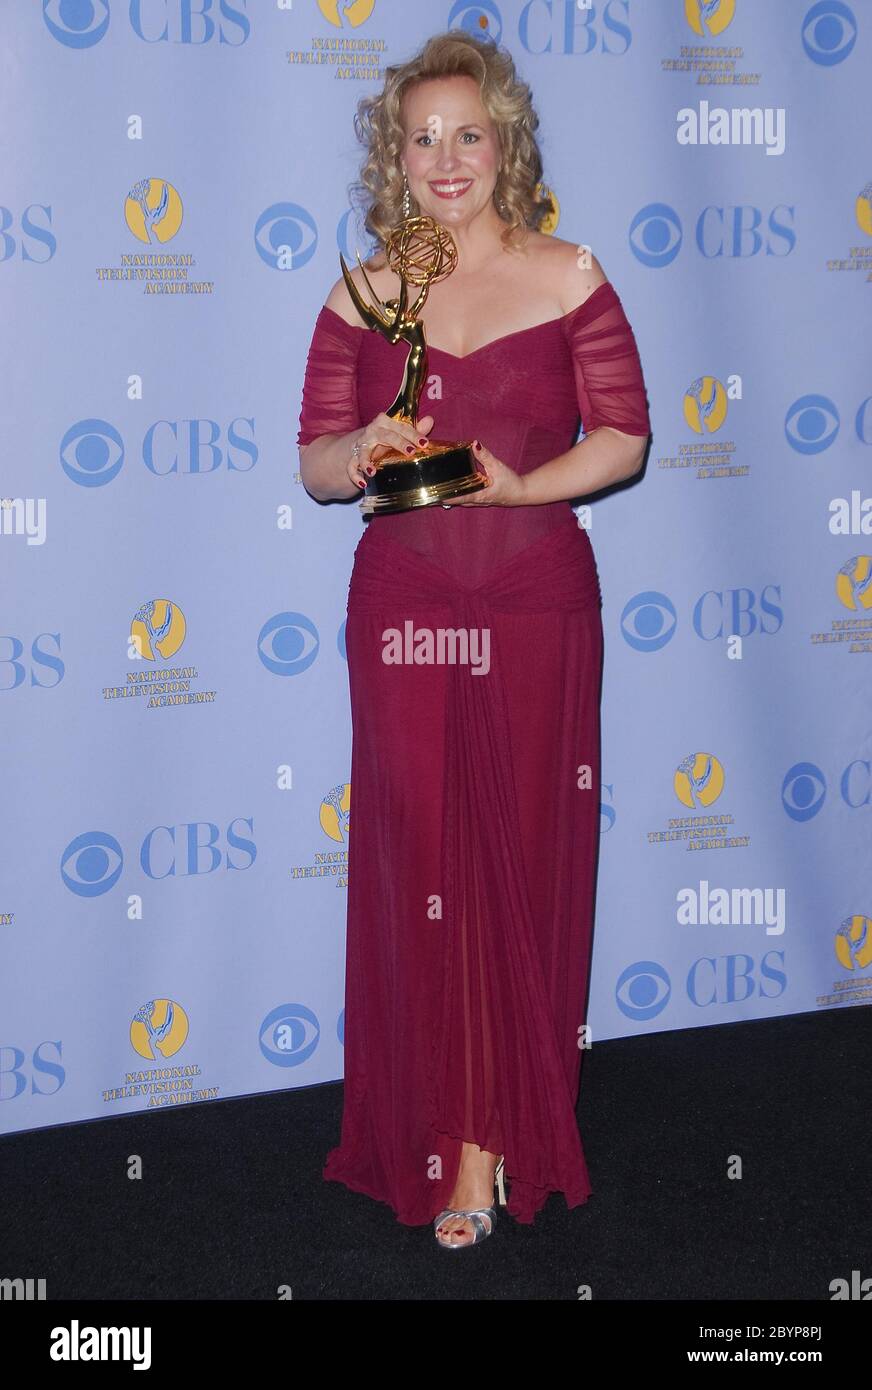 Genie Francis at the 34th Annual Daytime Emmy Awards - Press Room held at the Kodak Theatre in Hollywood, CA. The event took place on Friday, June 15, 2007. Photo by: SBM / PictureLux - File Reference # 34006-5934SBMPLX Stock Photo